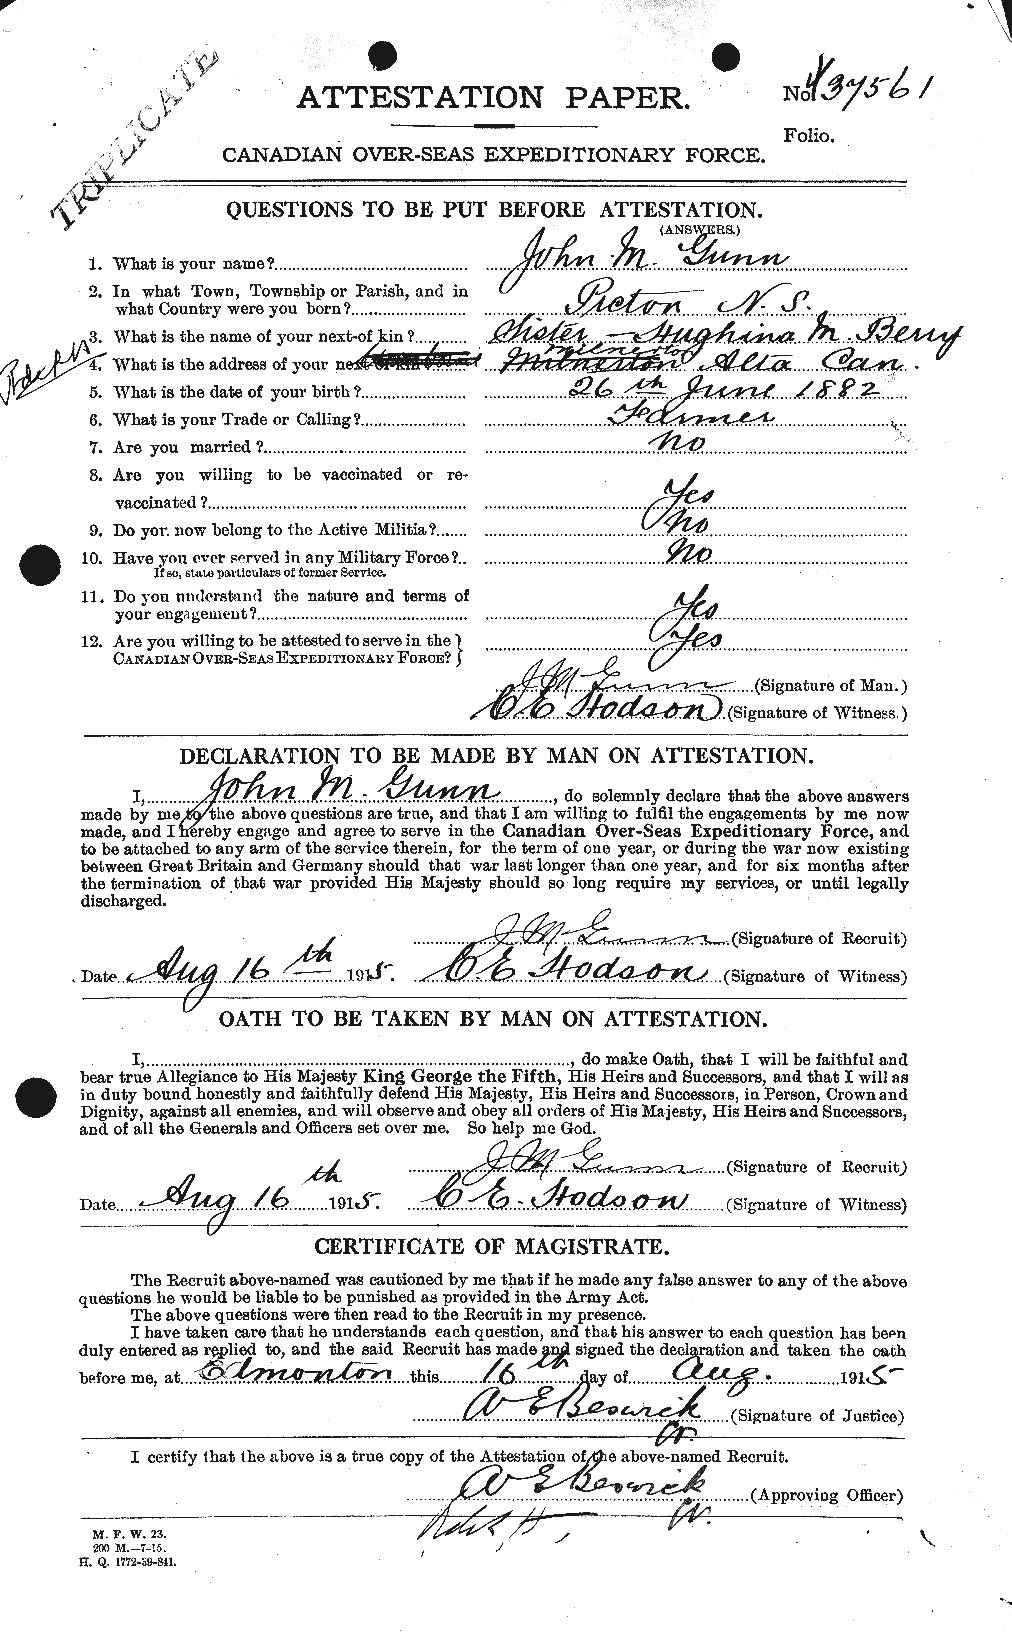 Personnel Records of the First World War - CEF 369297a